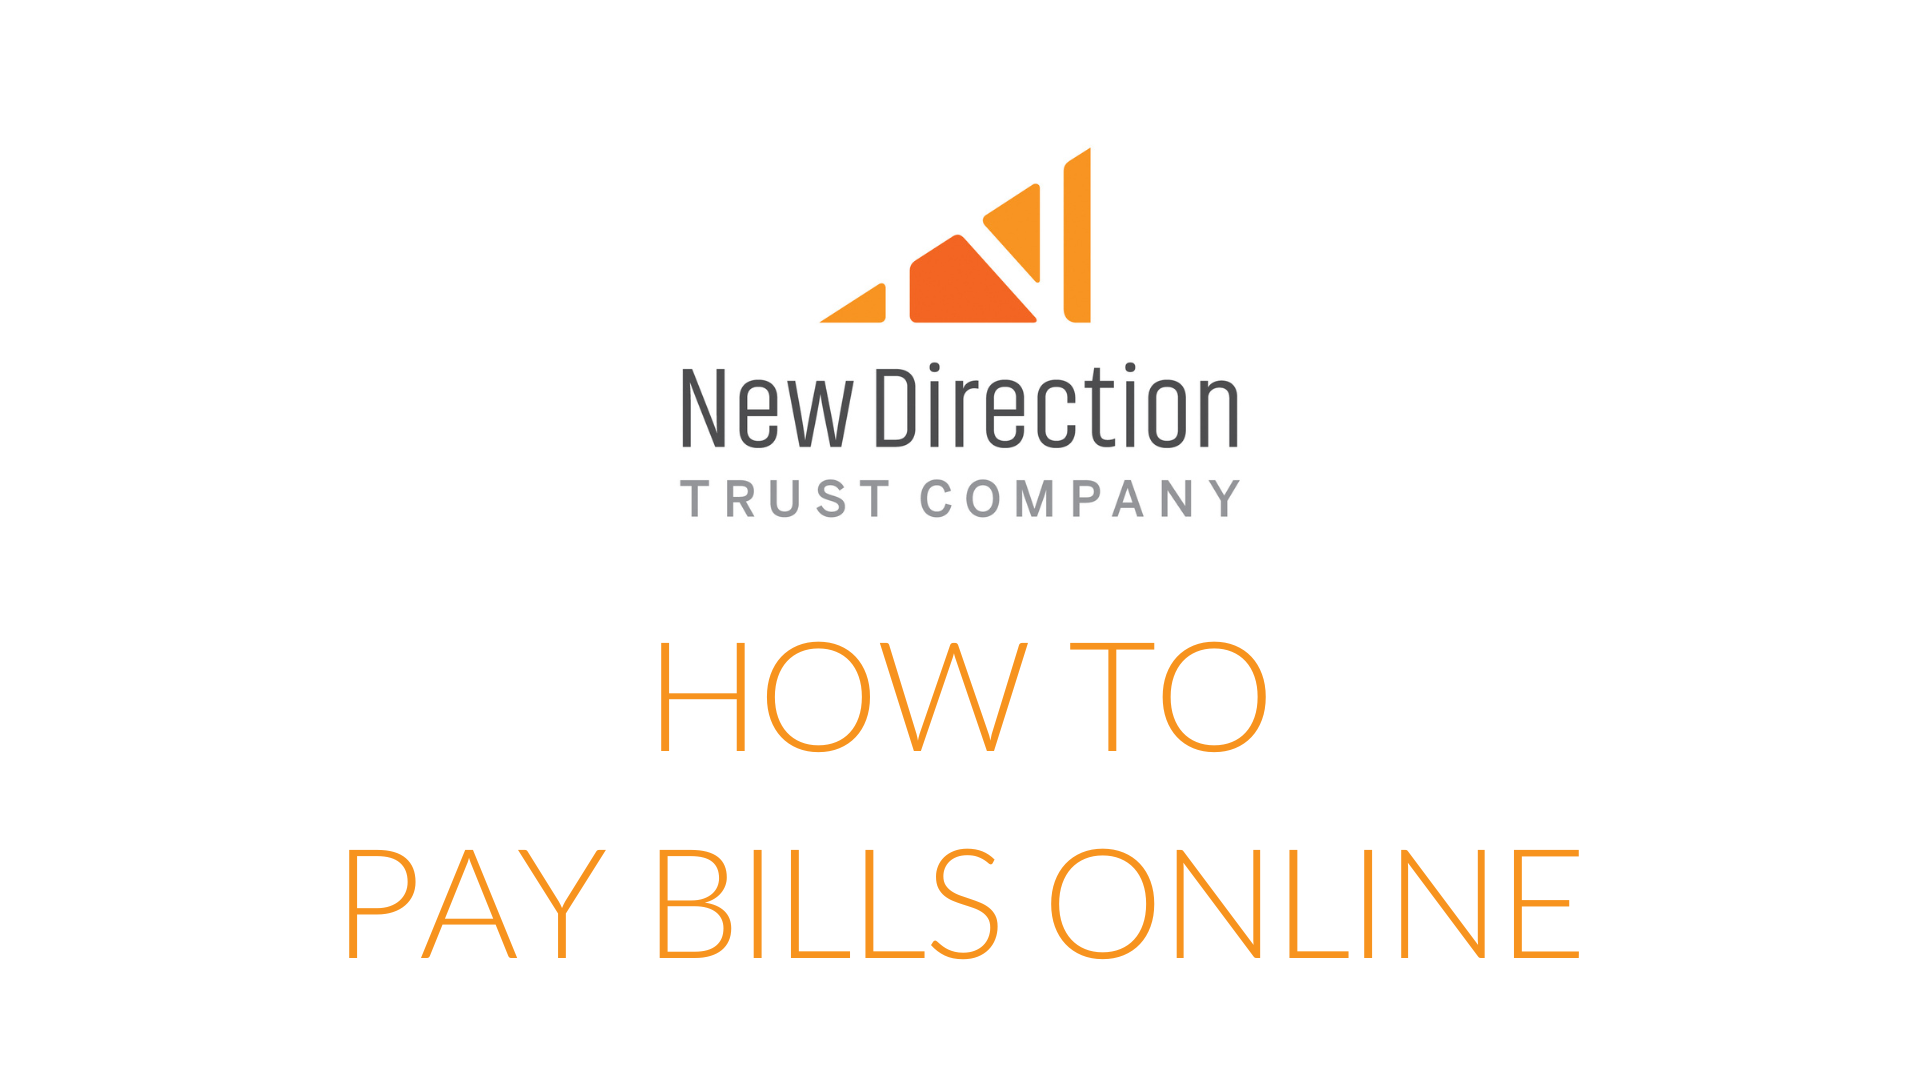 learn how to pay bills online with NDTCO client portal